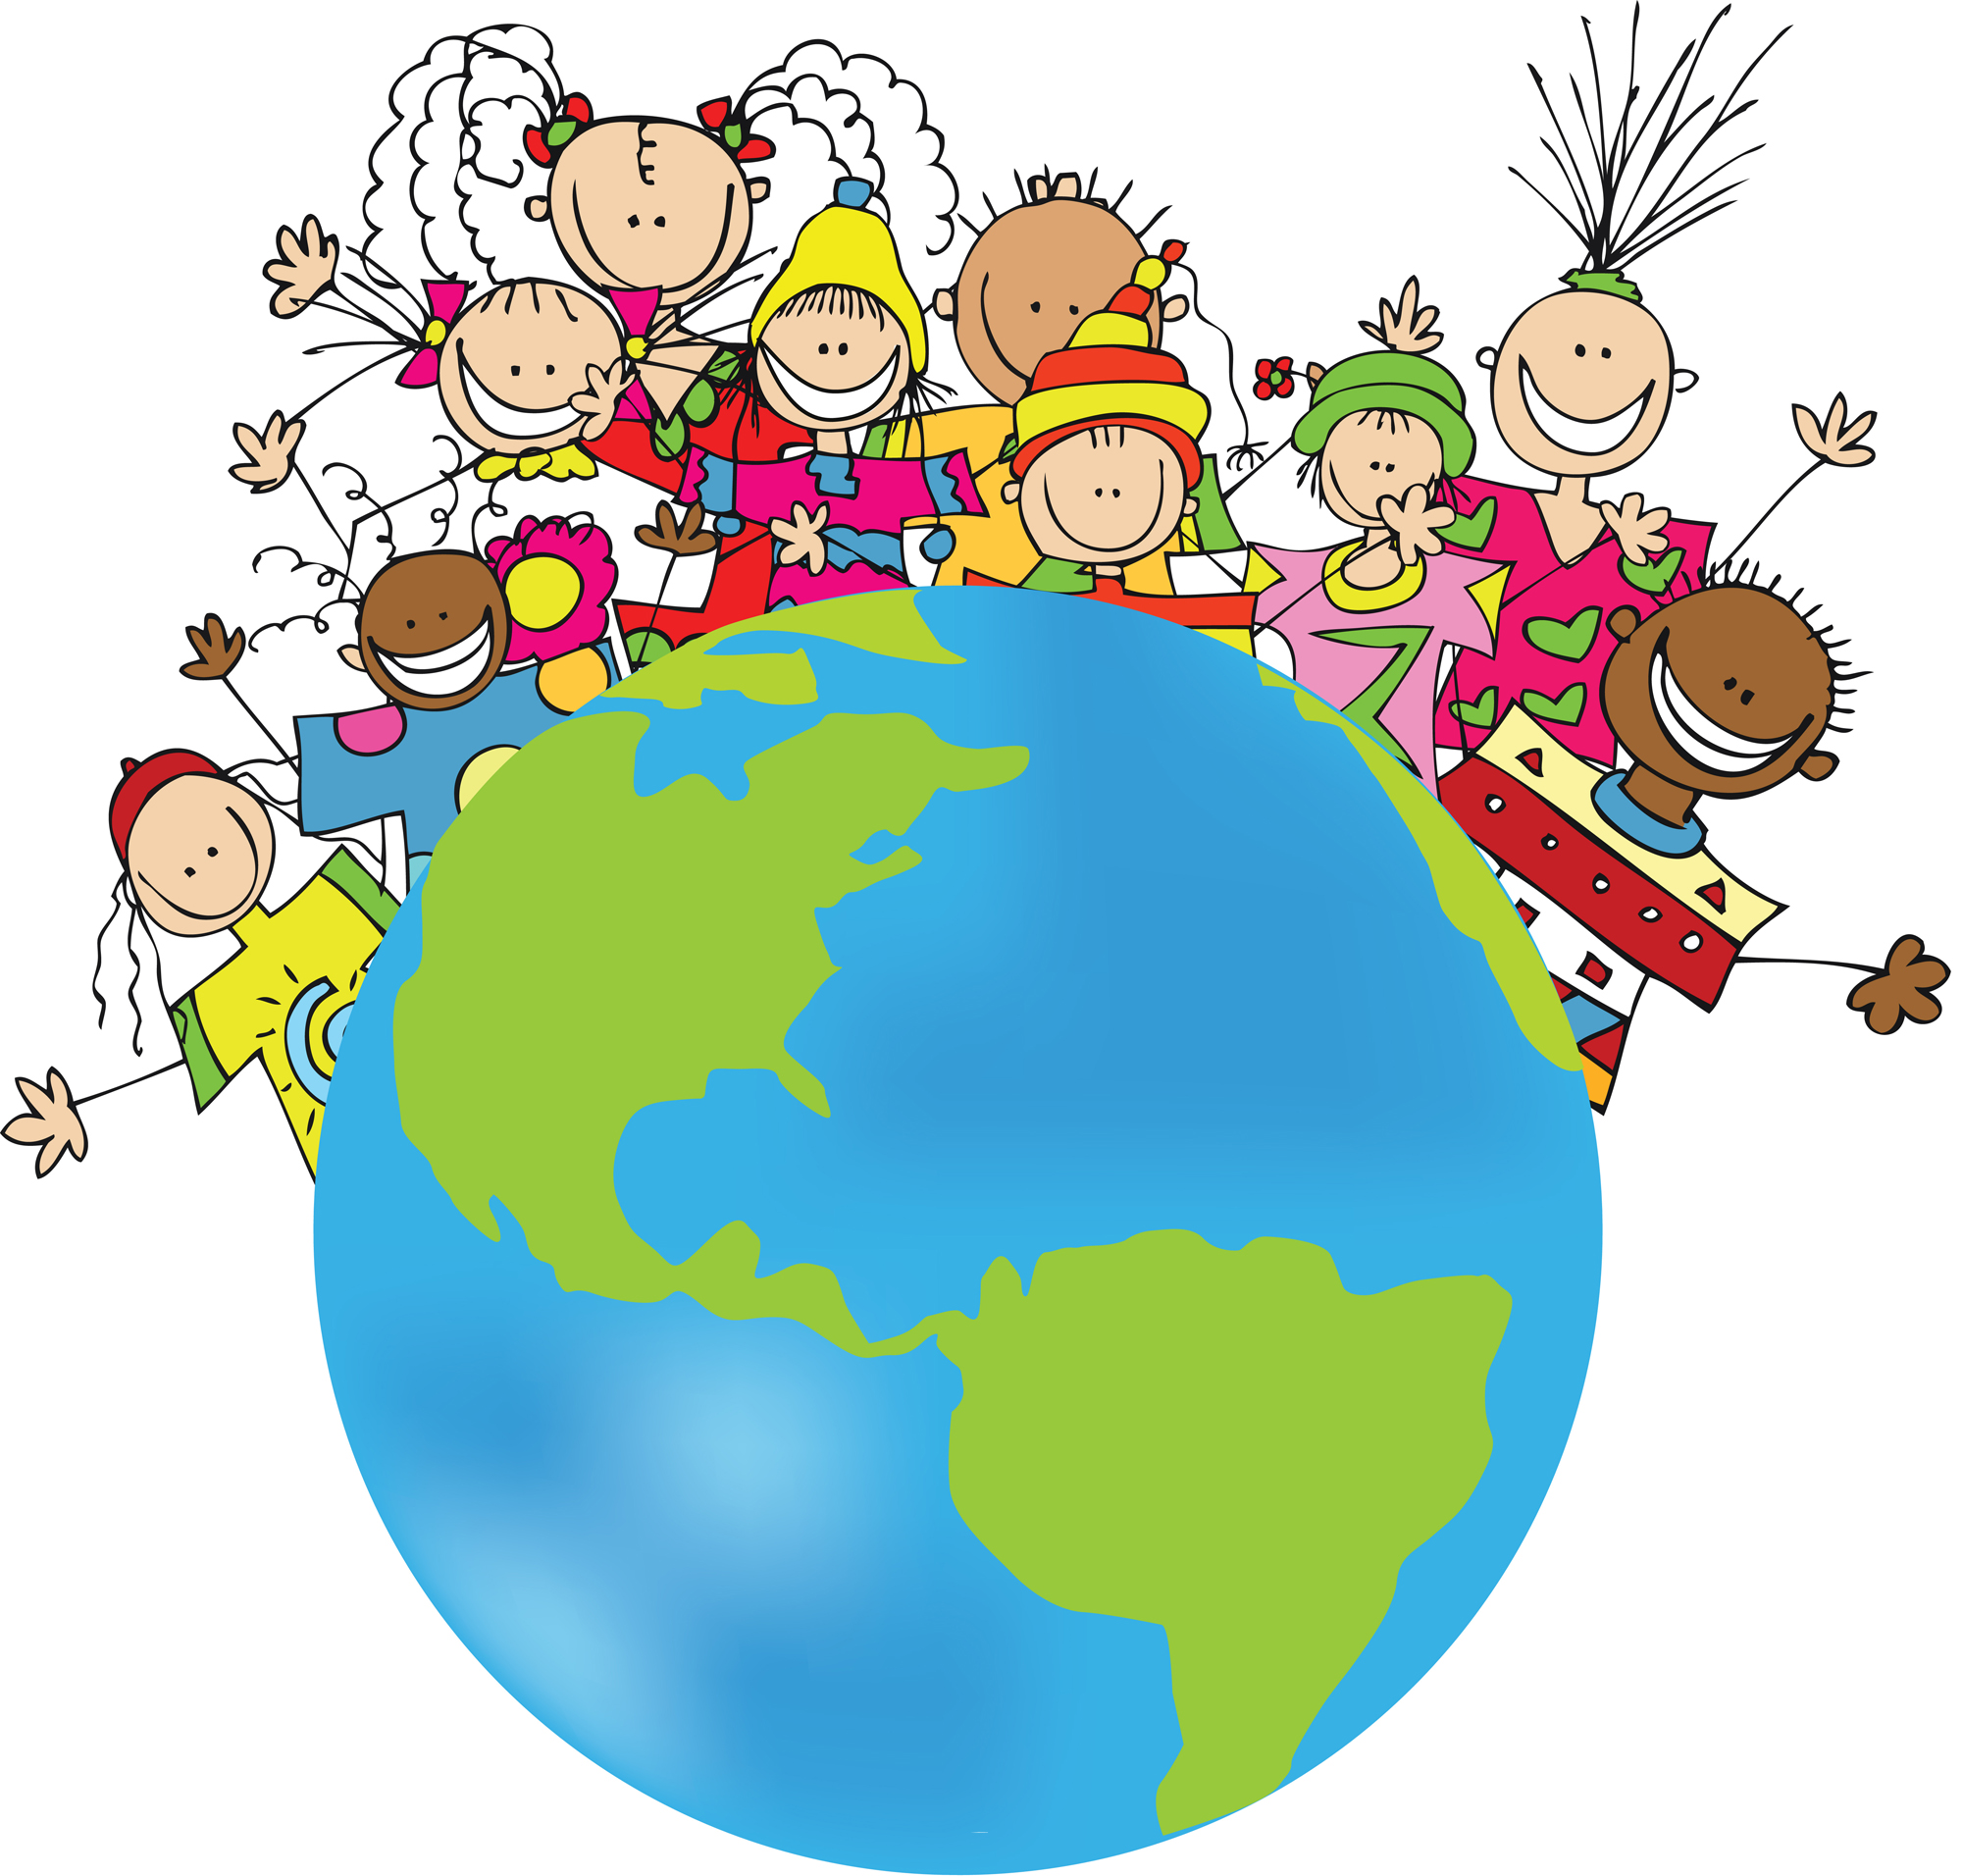 Gallery For > Pretty People Holding Globe Clipart.